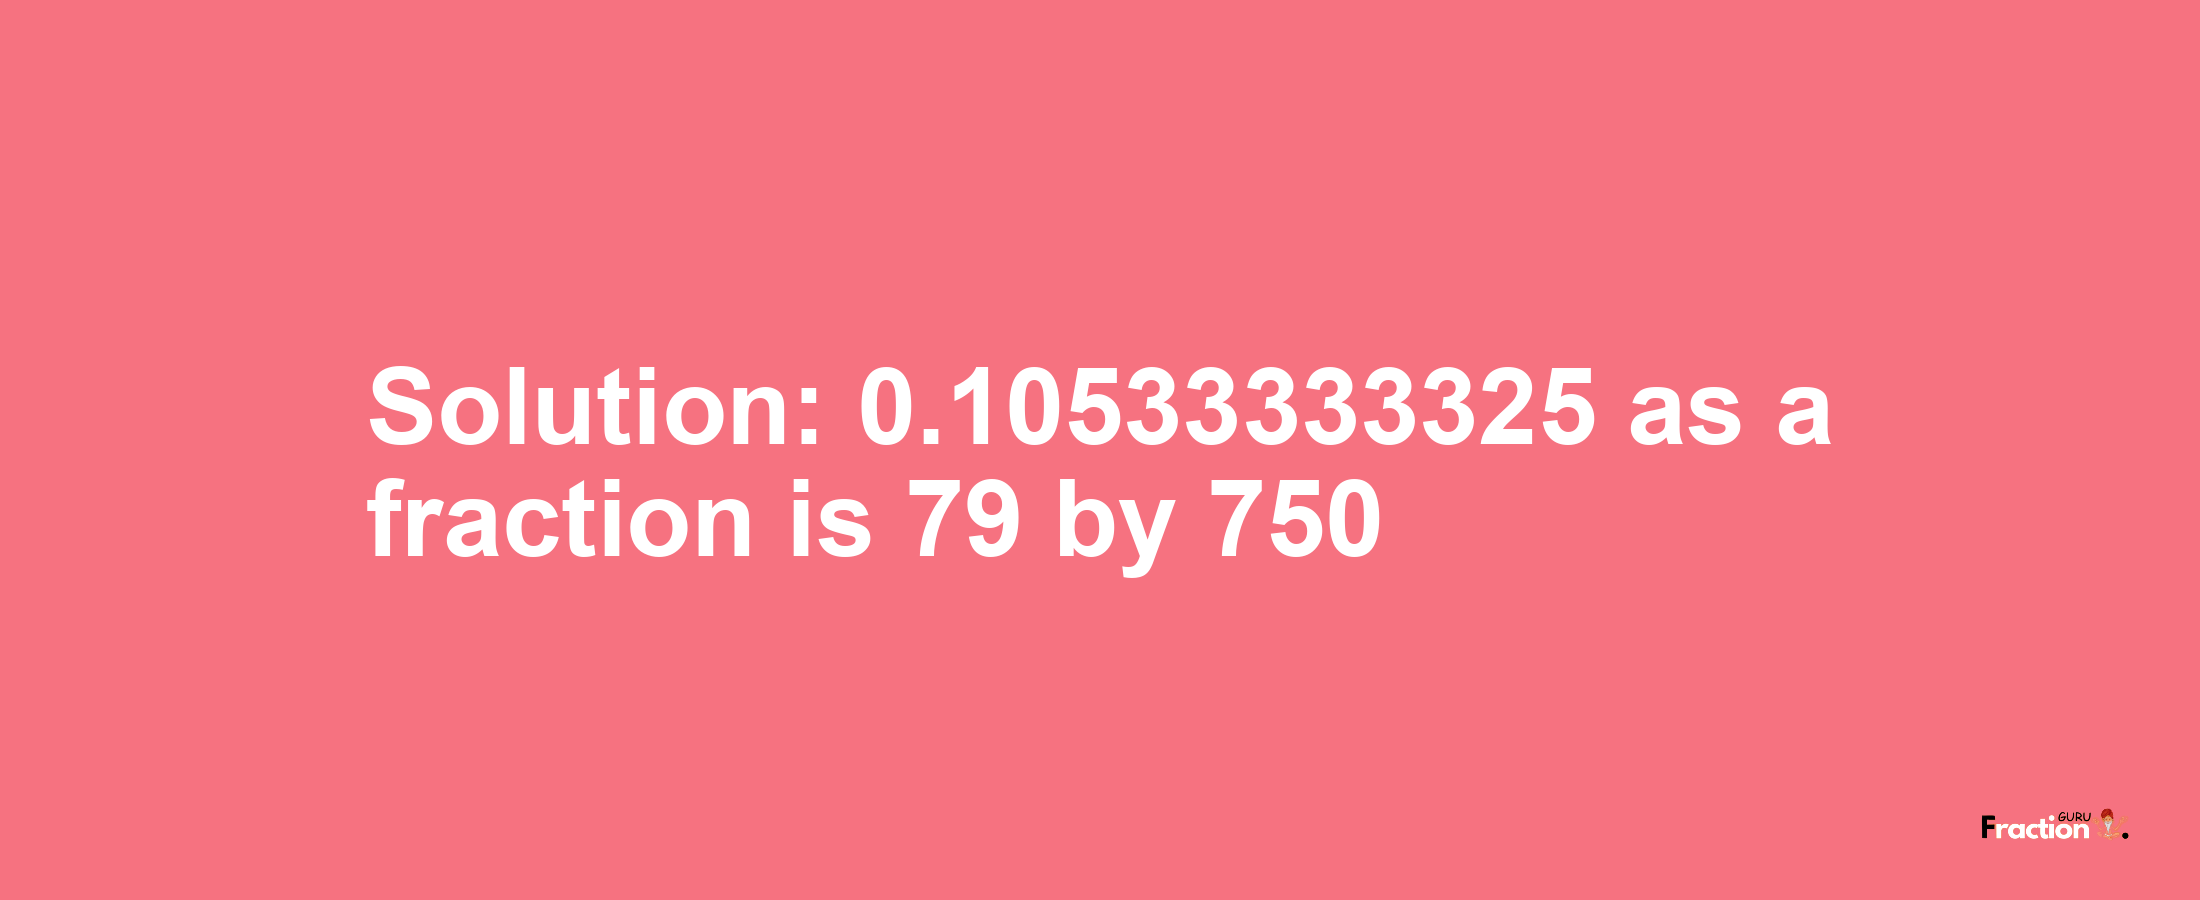 Solution:0.10533333325 as a fraction is 79/750